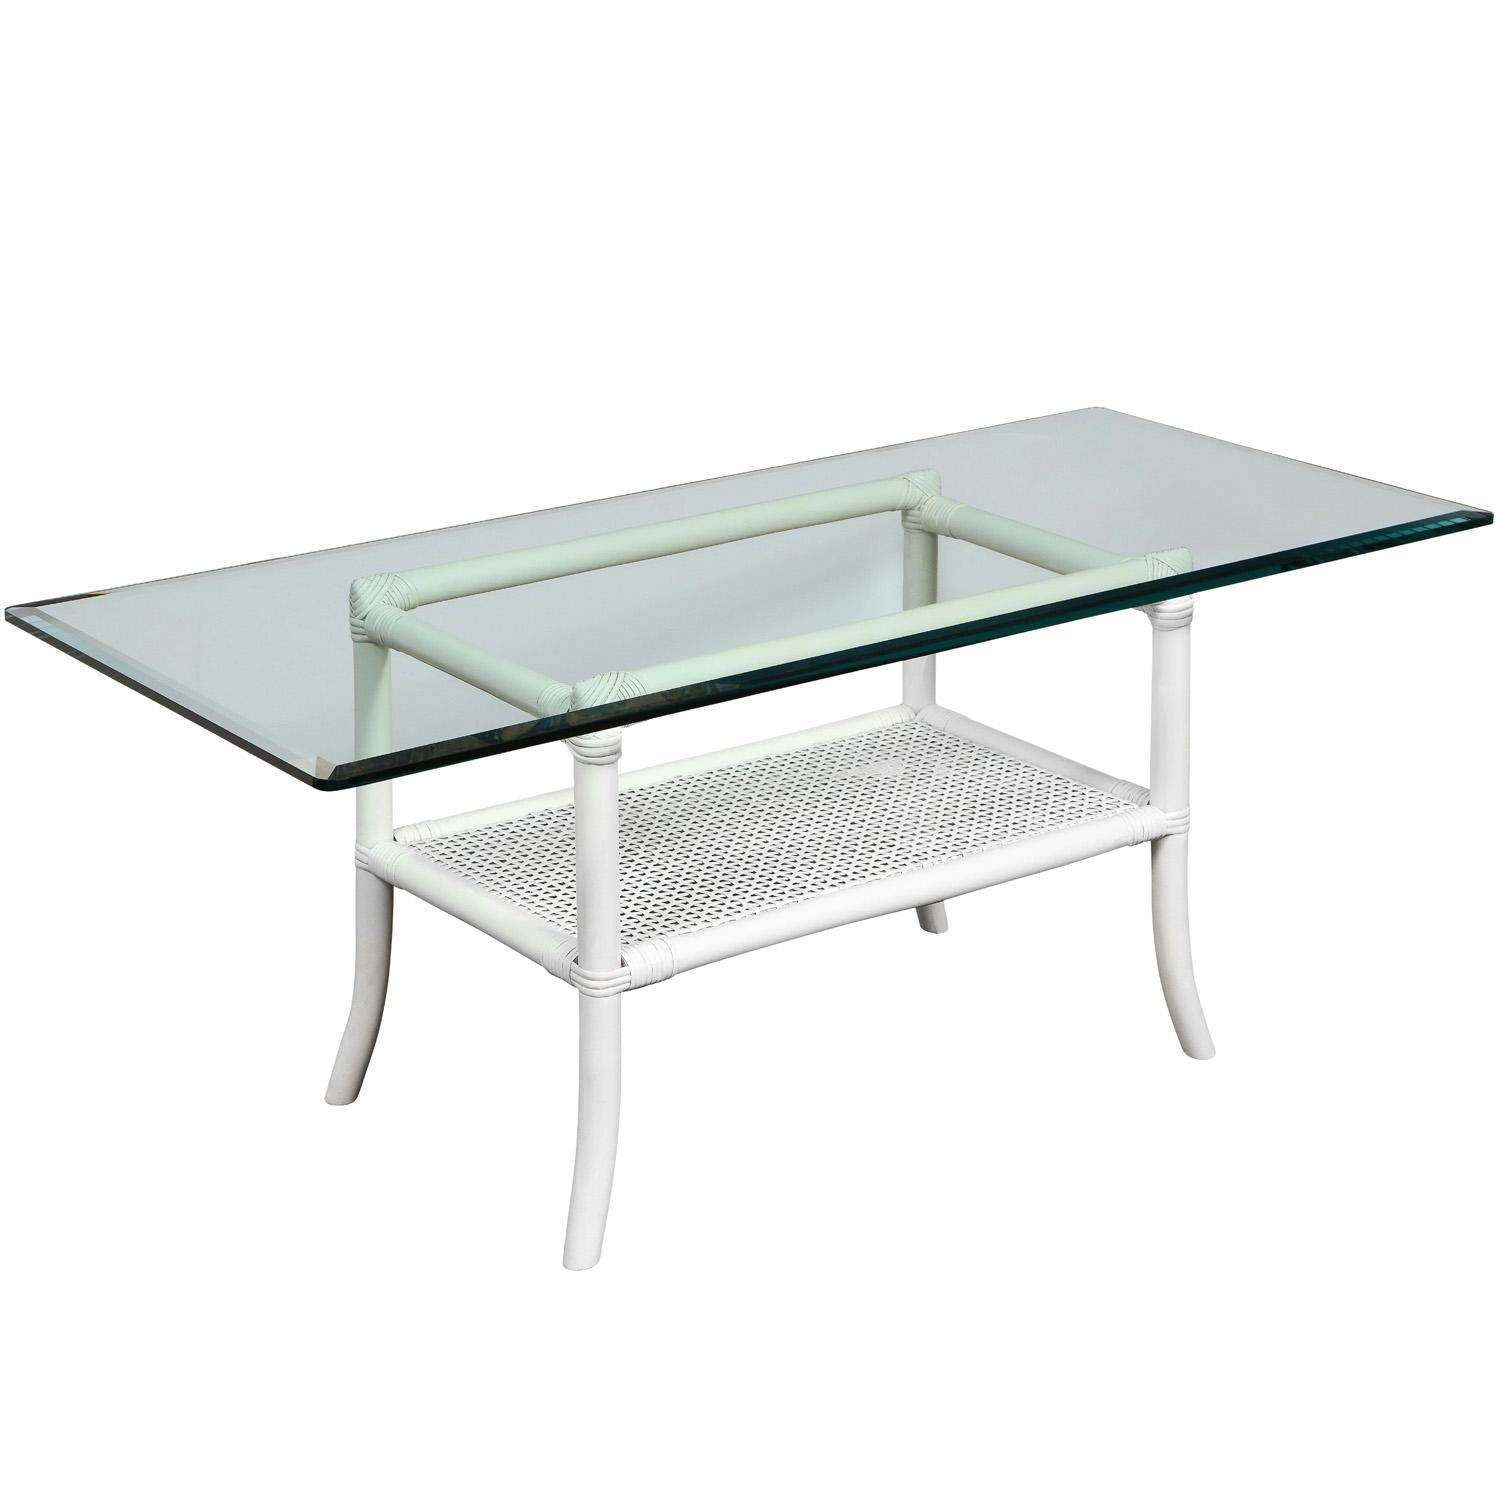 Elegant white lacquered coffee table with splaying legs, beveled glass top and caned shelf by Tommi Parzinger for Willow and Reed, American 1950’s. Willow and Reed designed furniture ideal for enclosed porches or outdoor areas not exposed to the